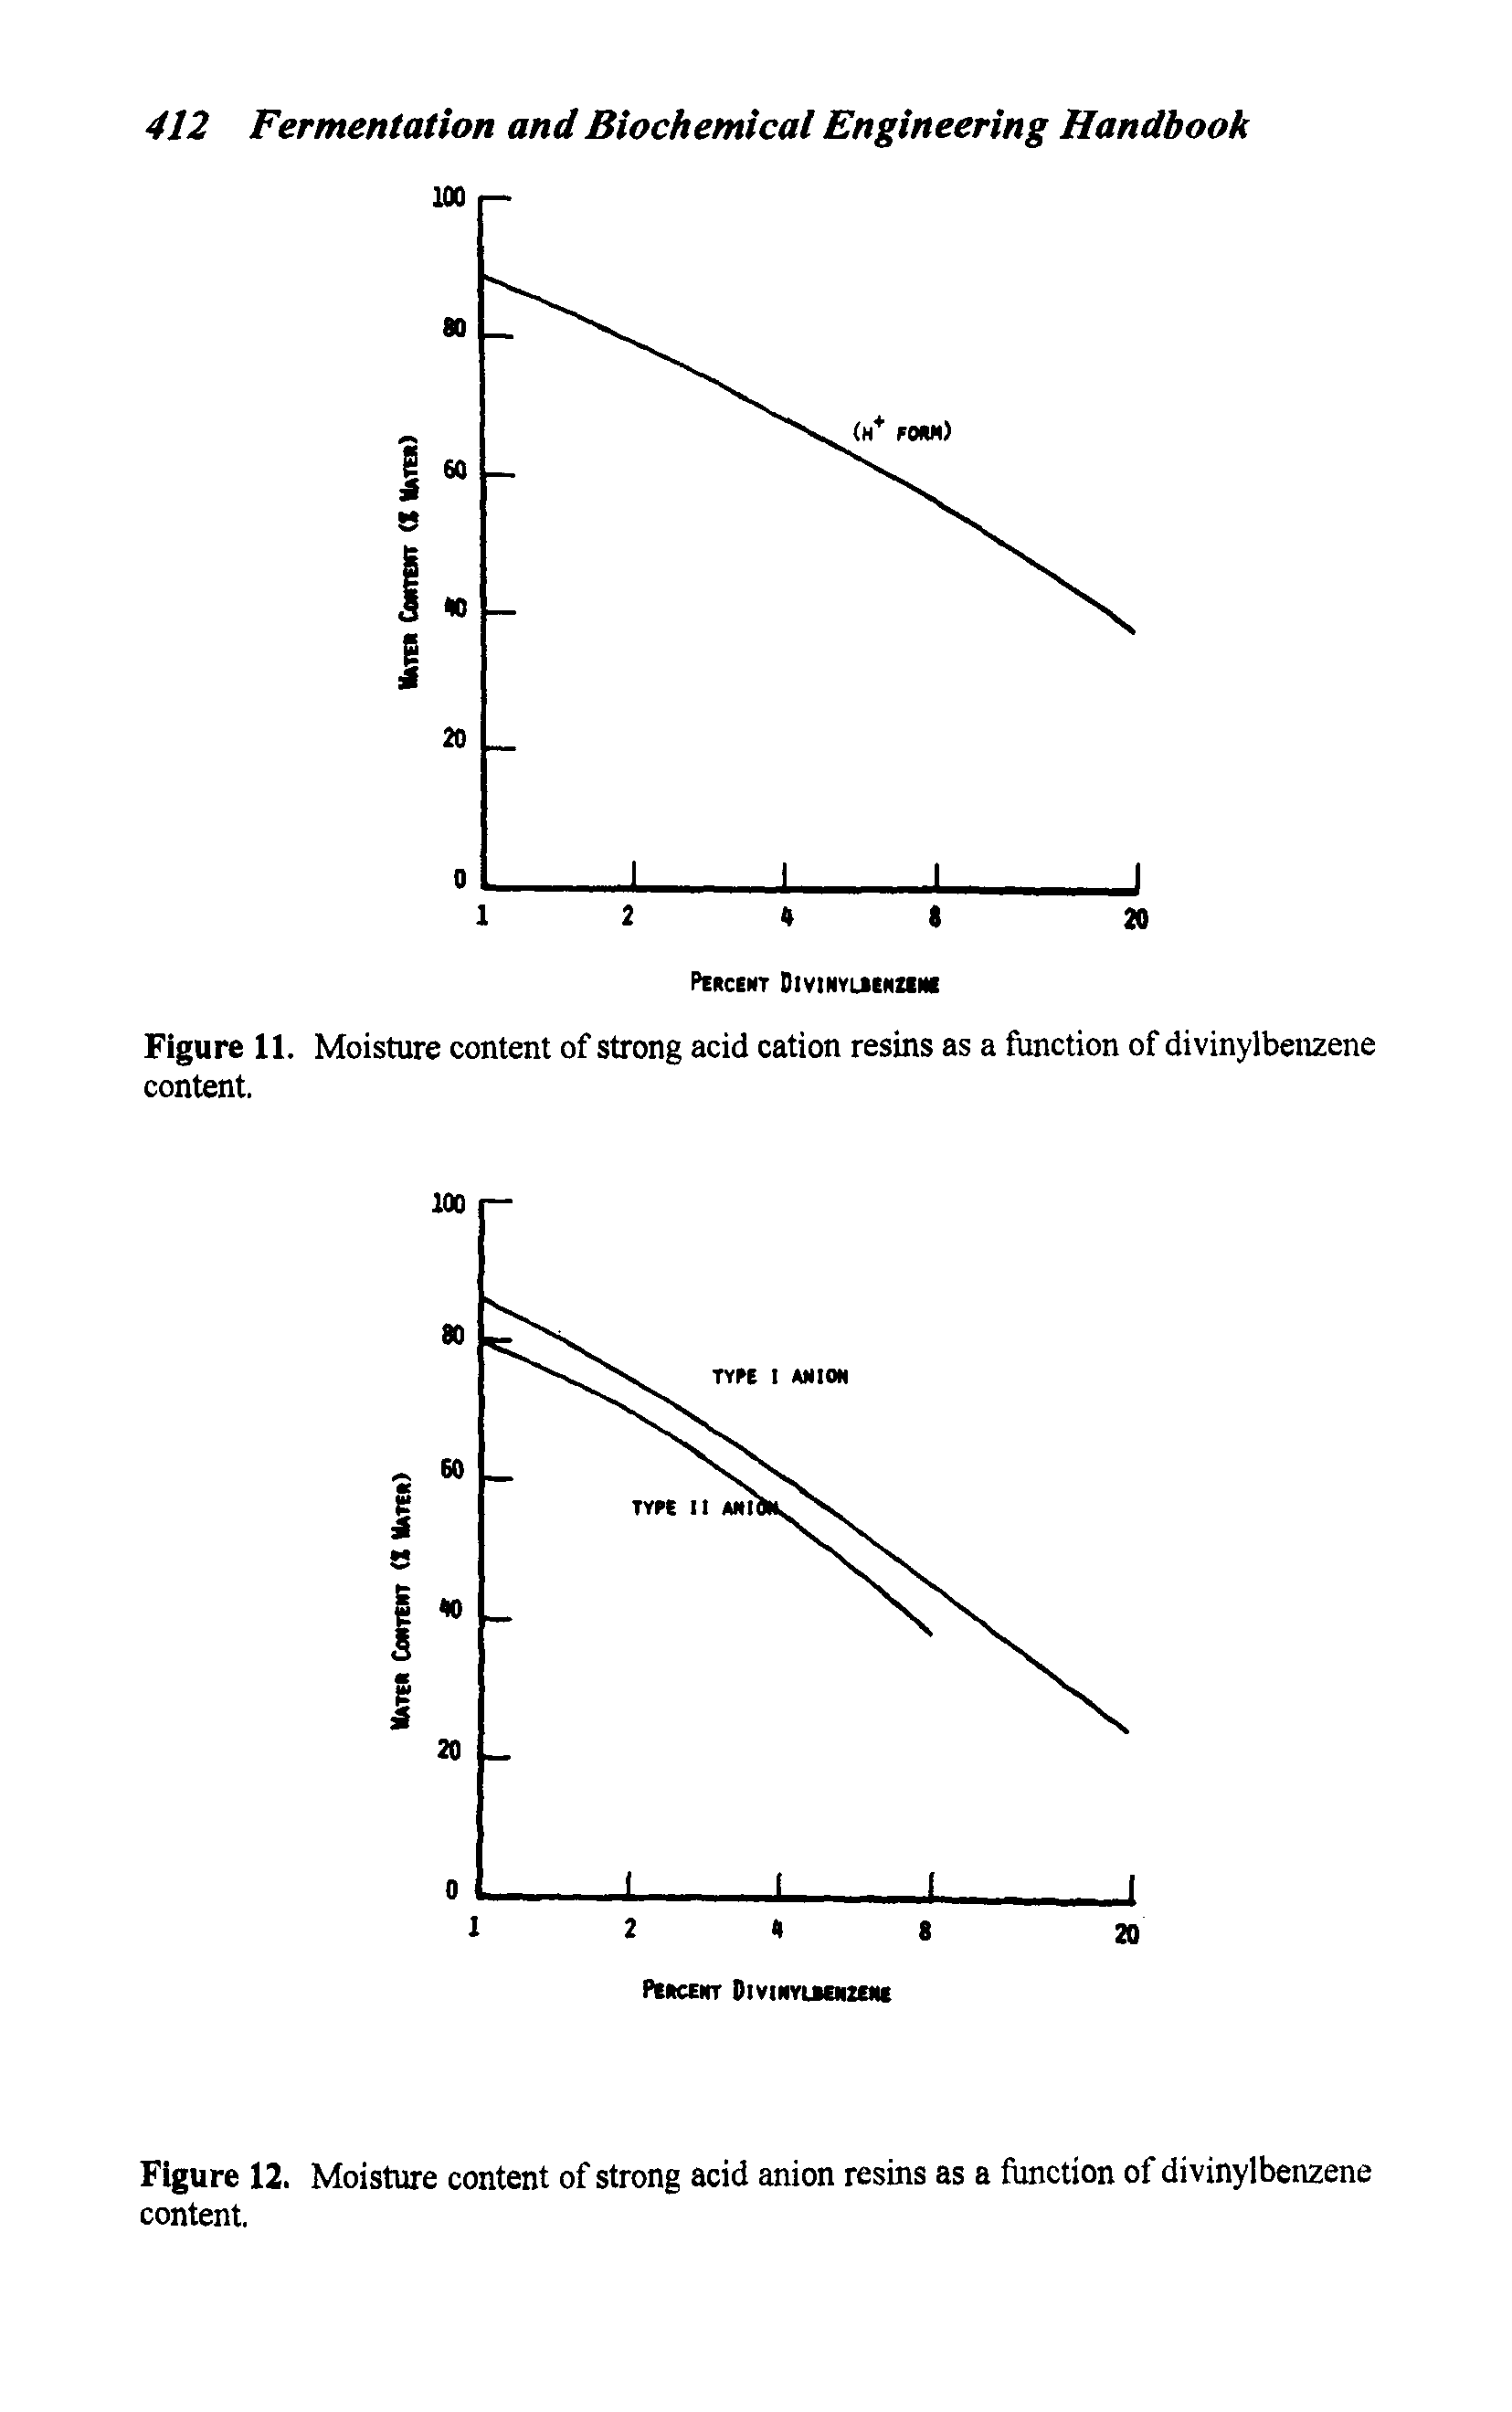 Figure 11. Moisture content of strong acid cation resins as a function of divinylbenzene content.